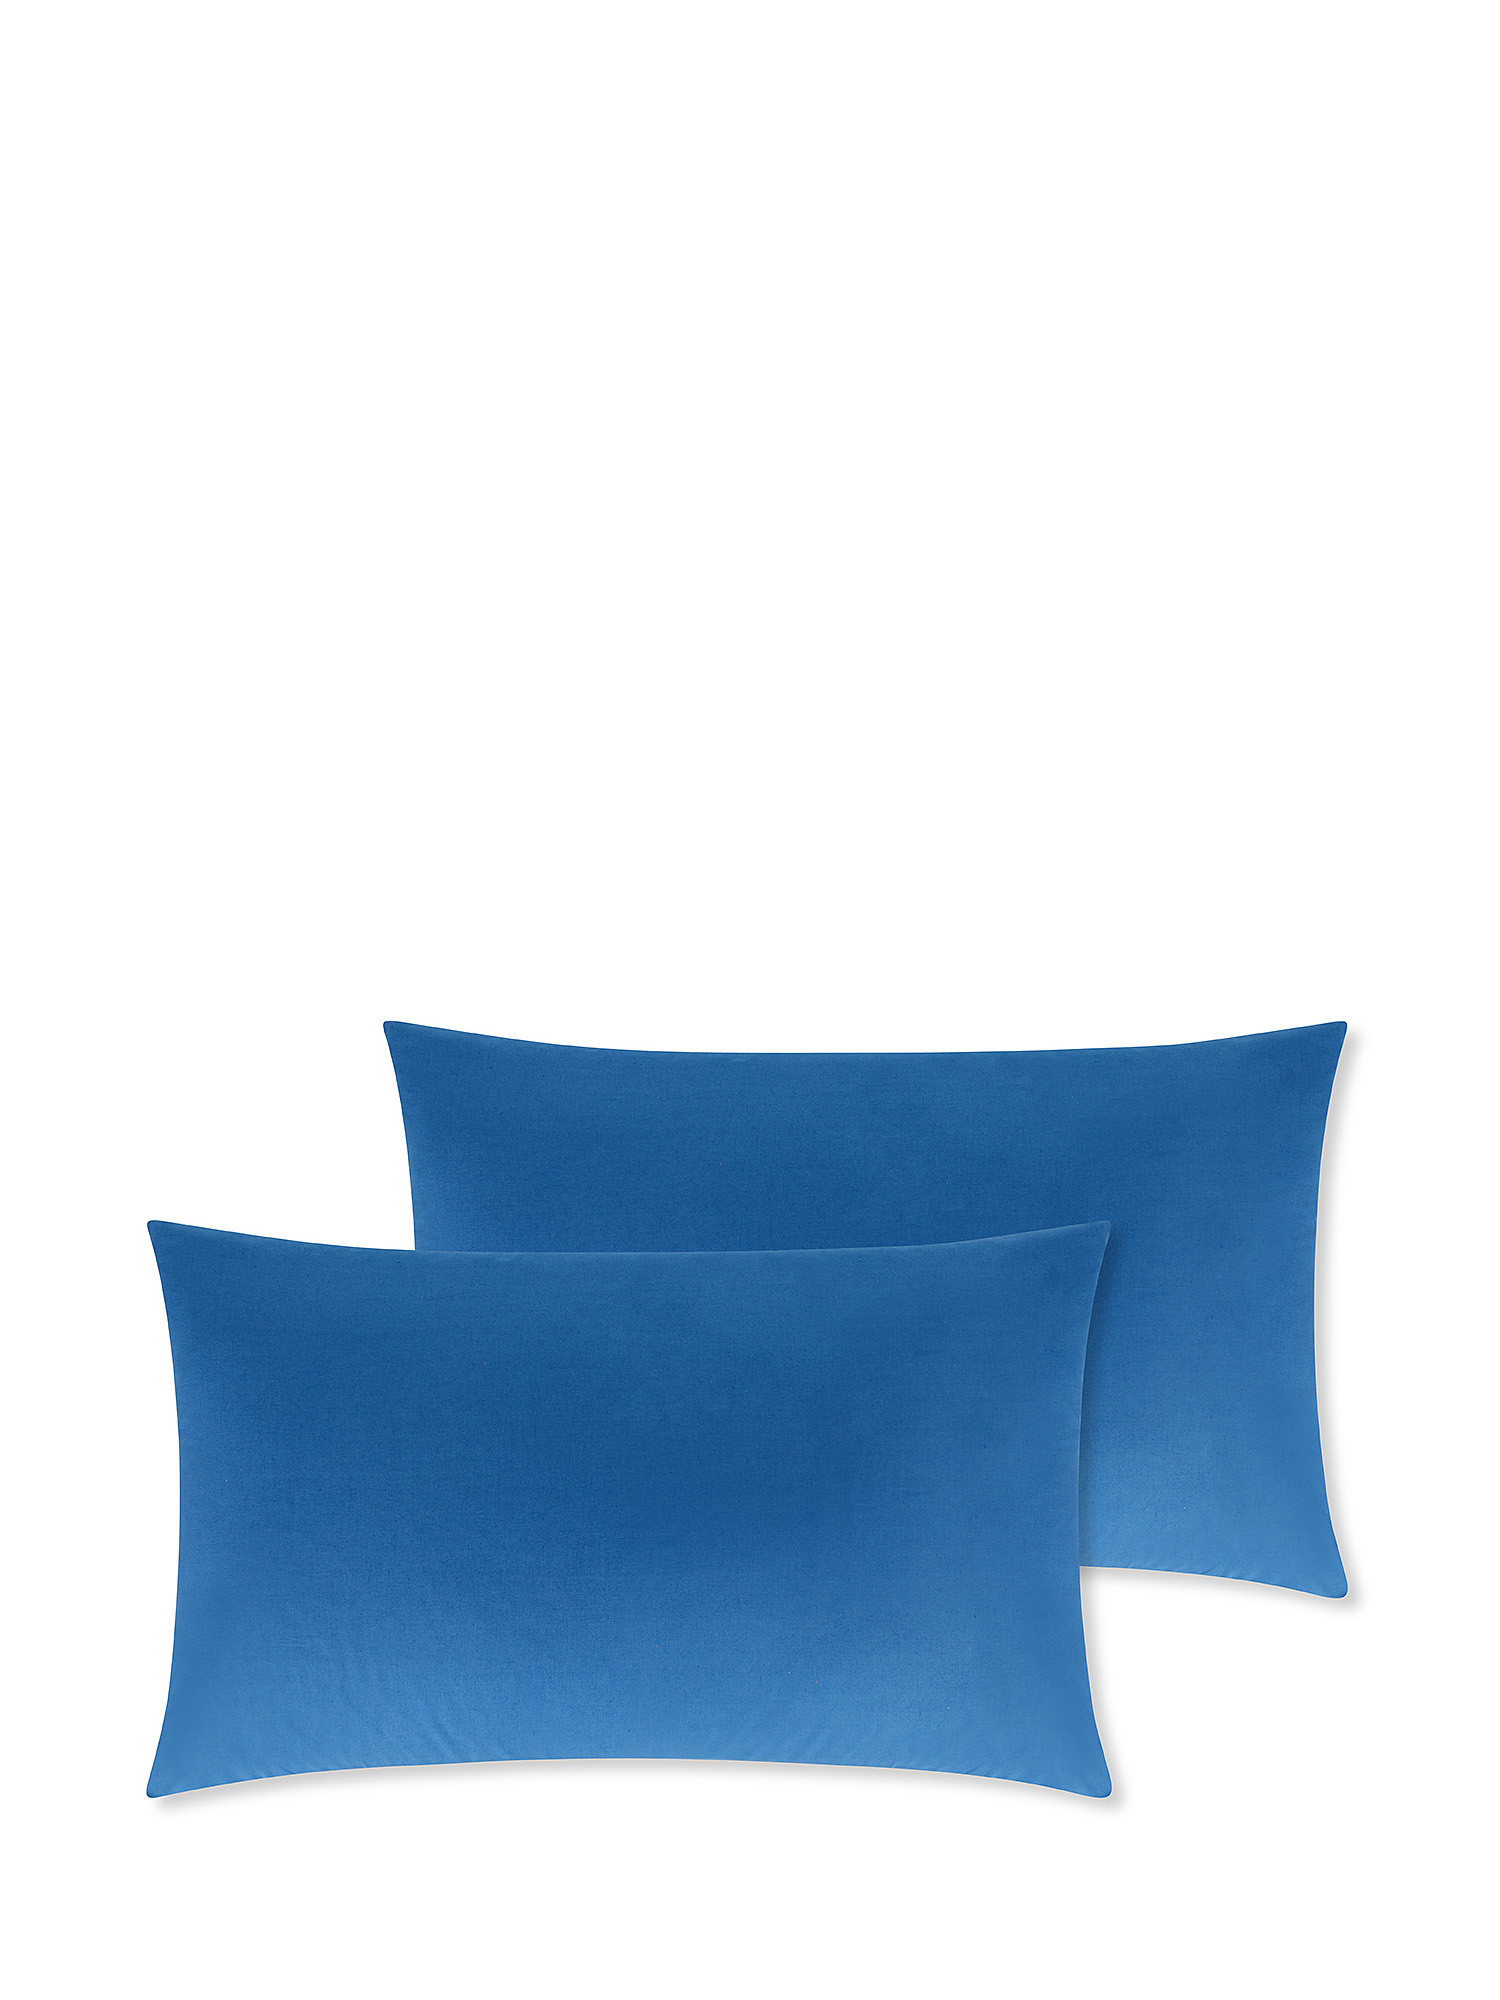 Set of 2 solid color cotton percale pillowcases, Blue, large image number 0